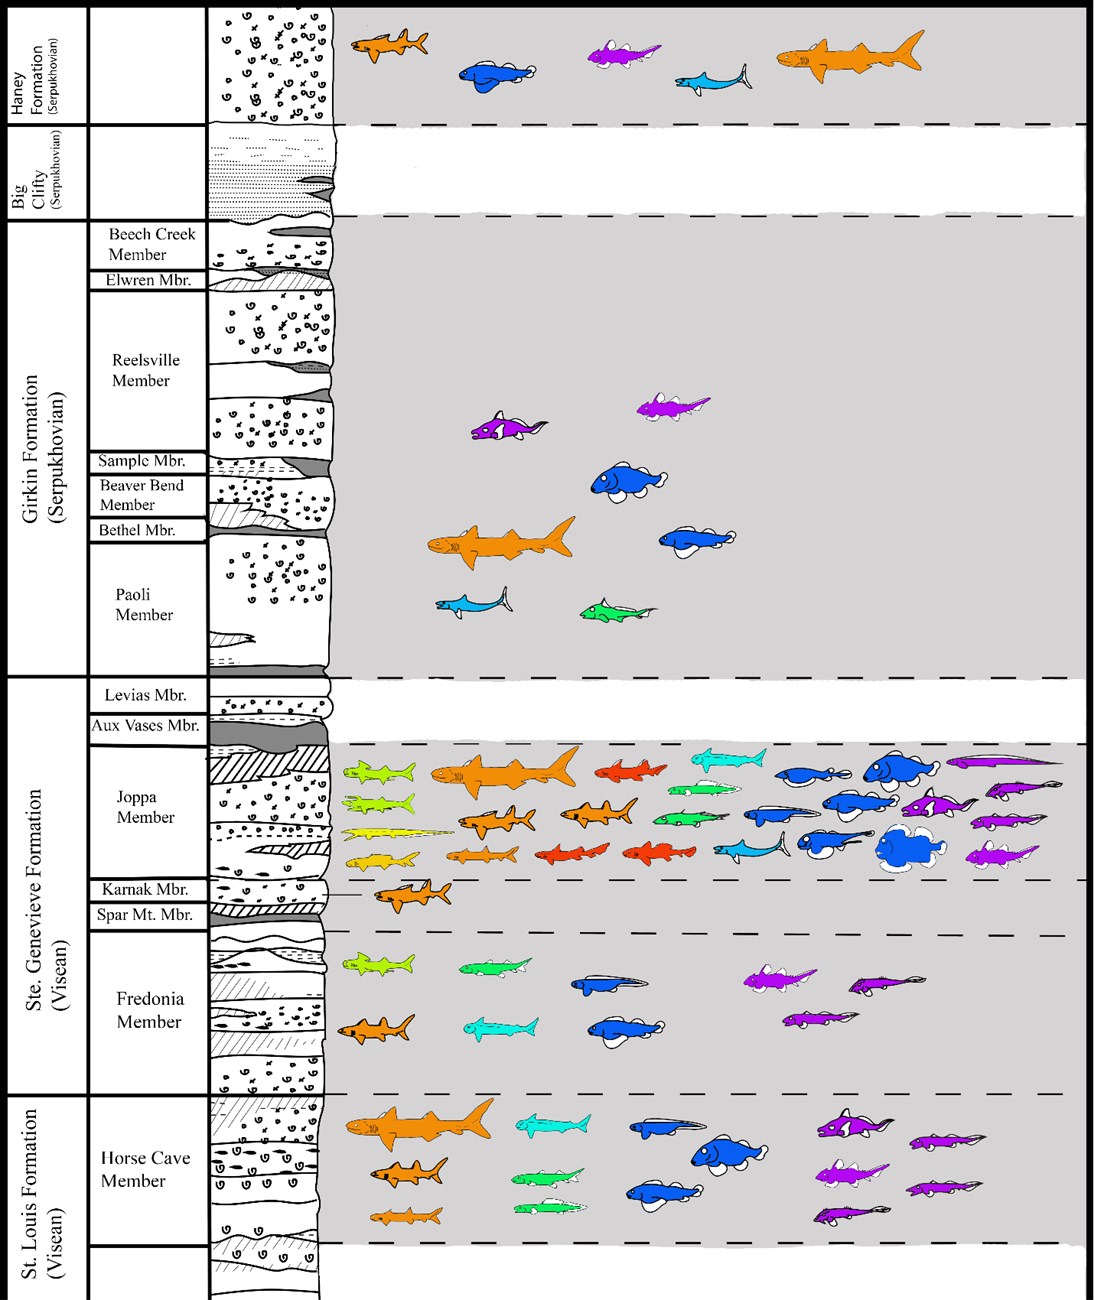 geologic stratographic column drawing showing rock layers with small outline icons to represent fishes and sharks that occur in each rock layer.